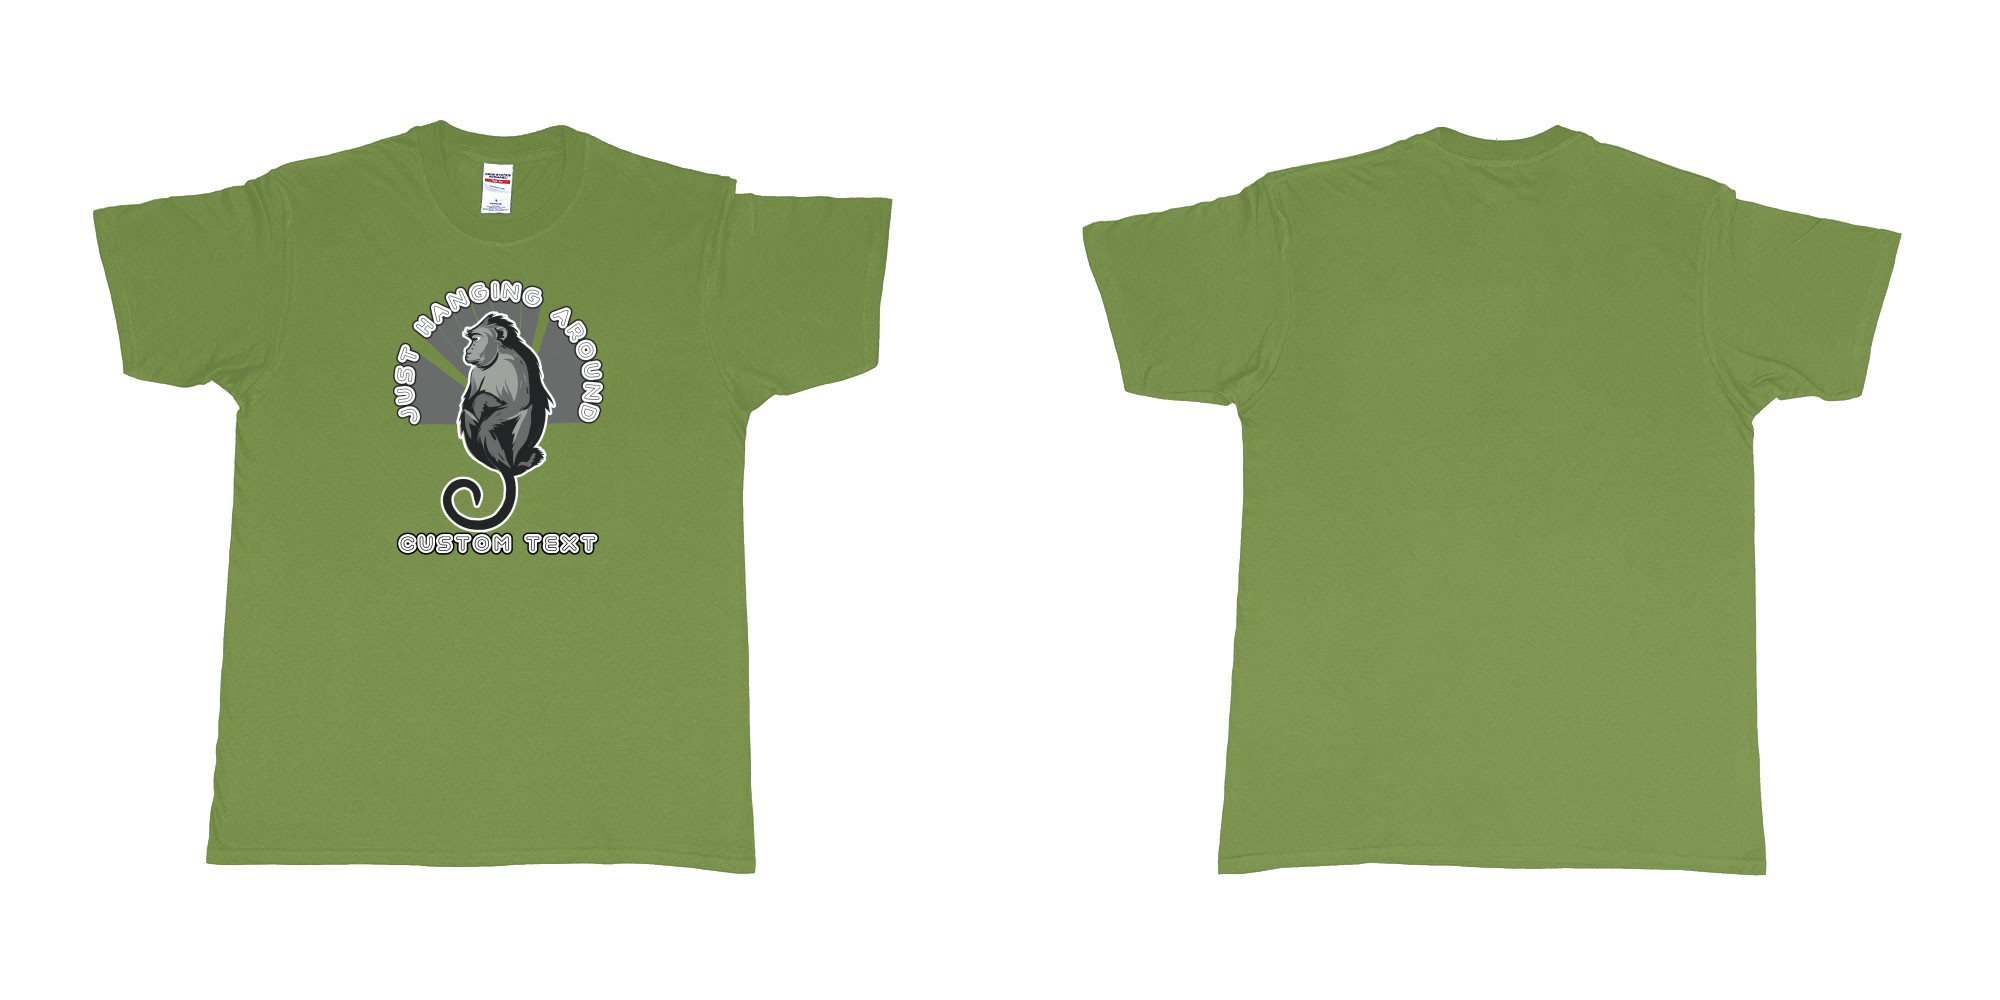 Custom tshirt design just hanging around monkey in fabric color military-green choice your own text made in Bali by The Pirate Way